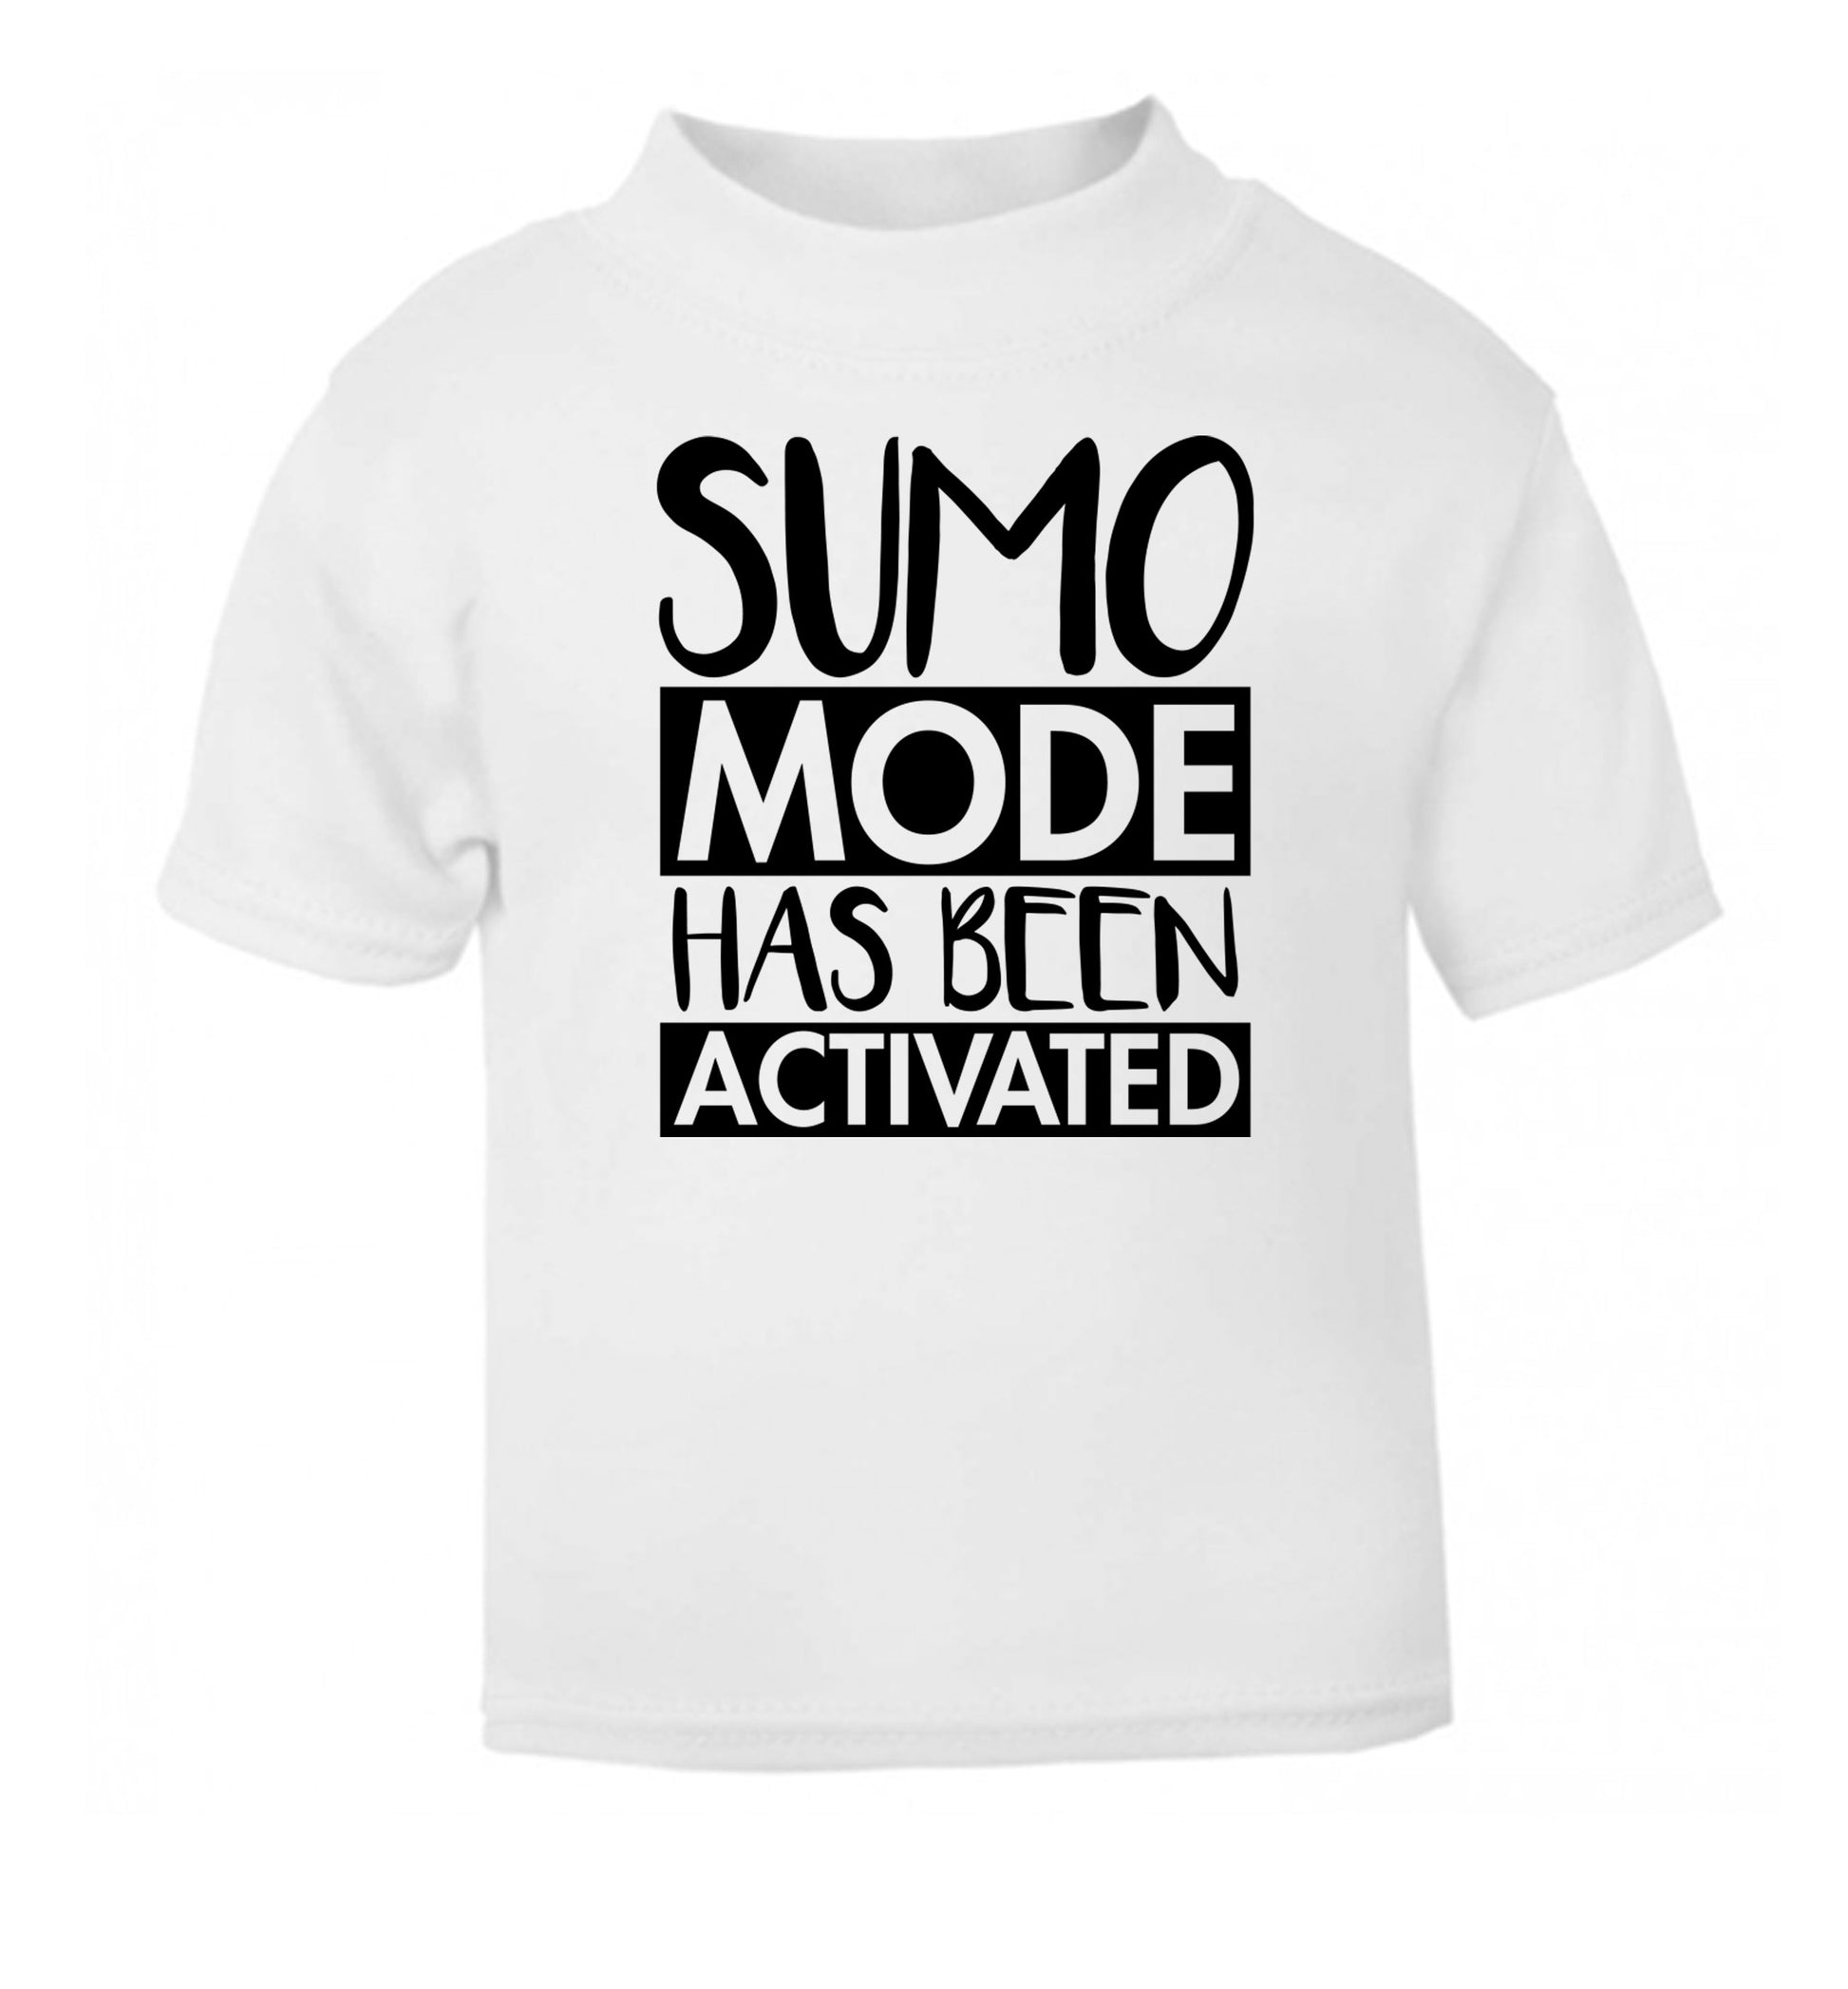 Sumo mode activated white Baby Toddler Tshirt 2 Years